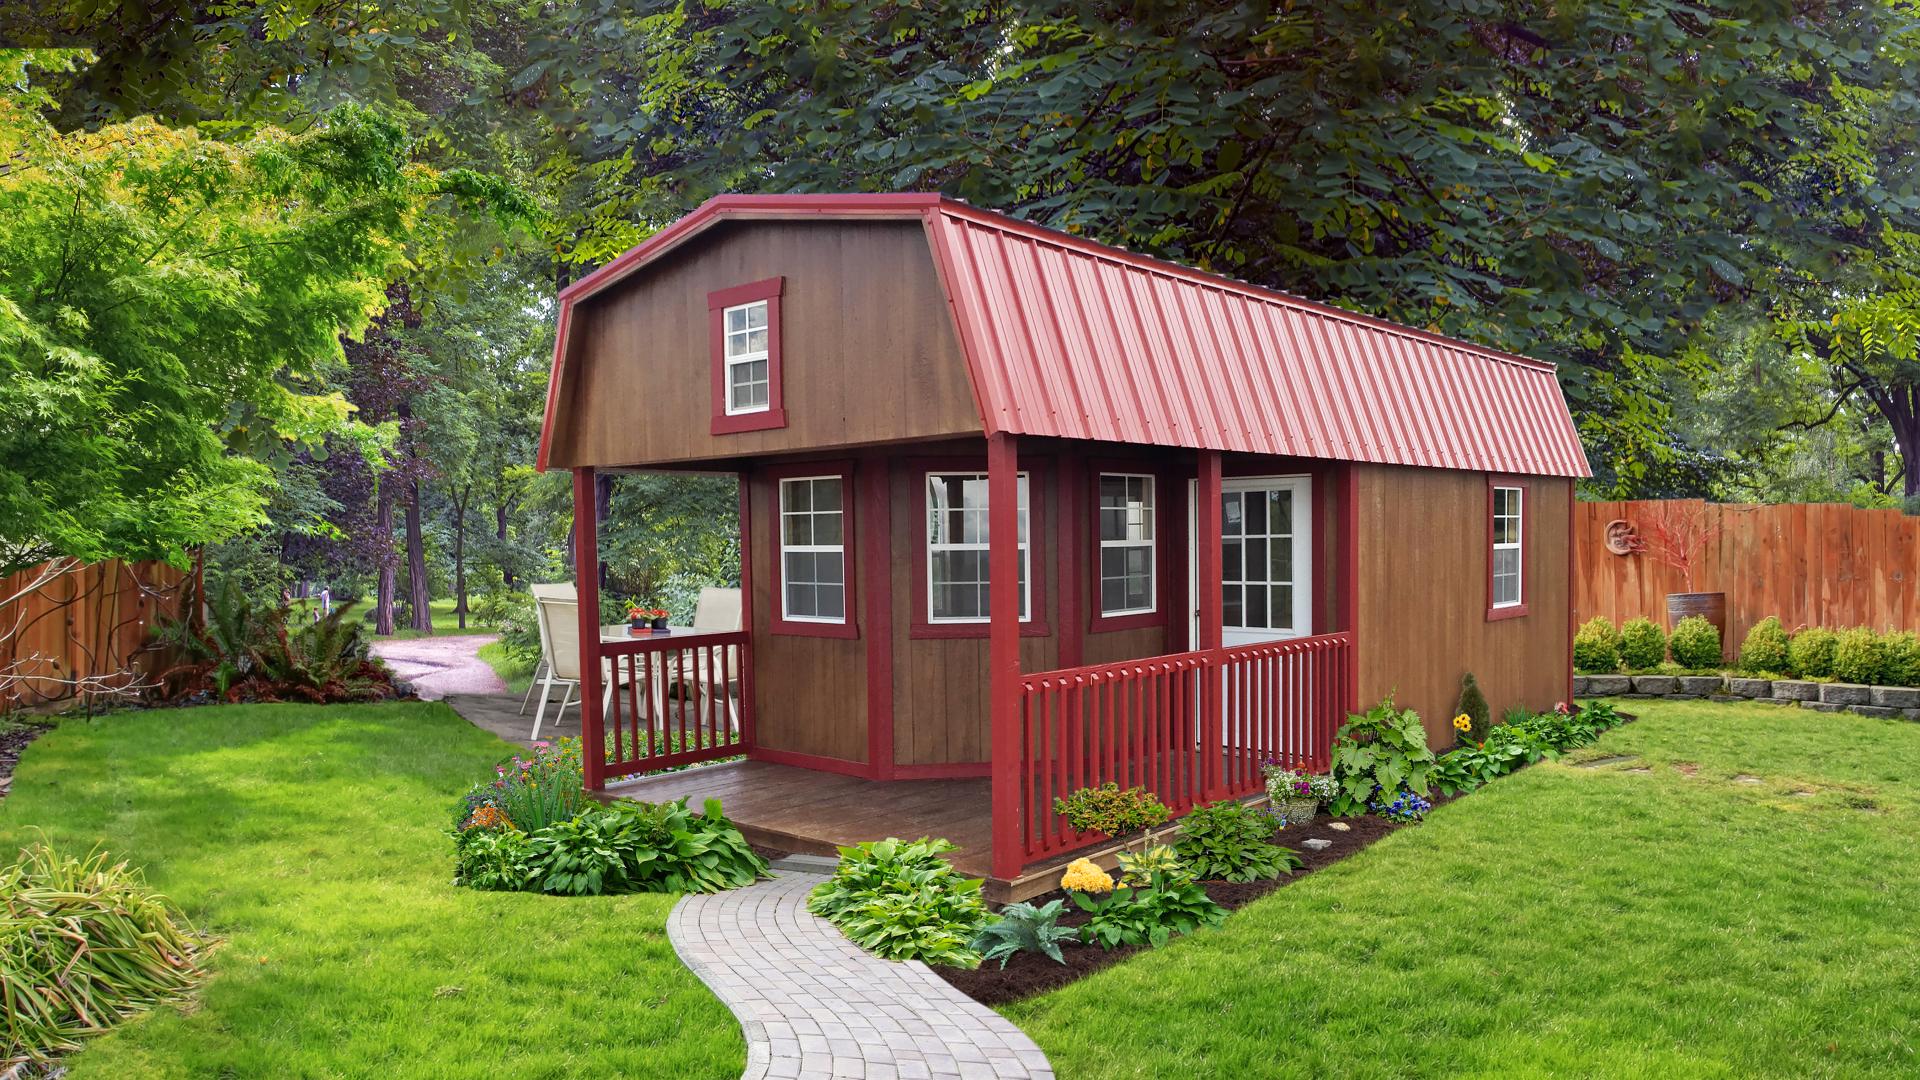 Brown lofted cabin with red trim, red metal roof, front porch, front doors, and many windows sitting in a residential area with a walkway and fence in the background. 